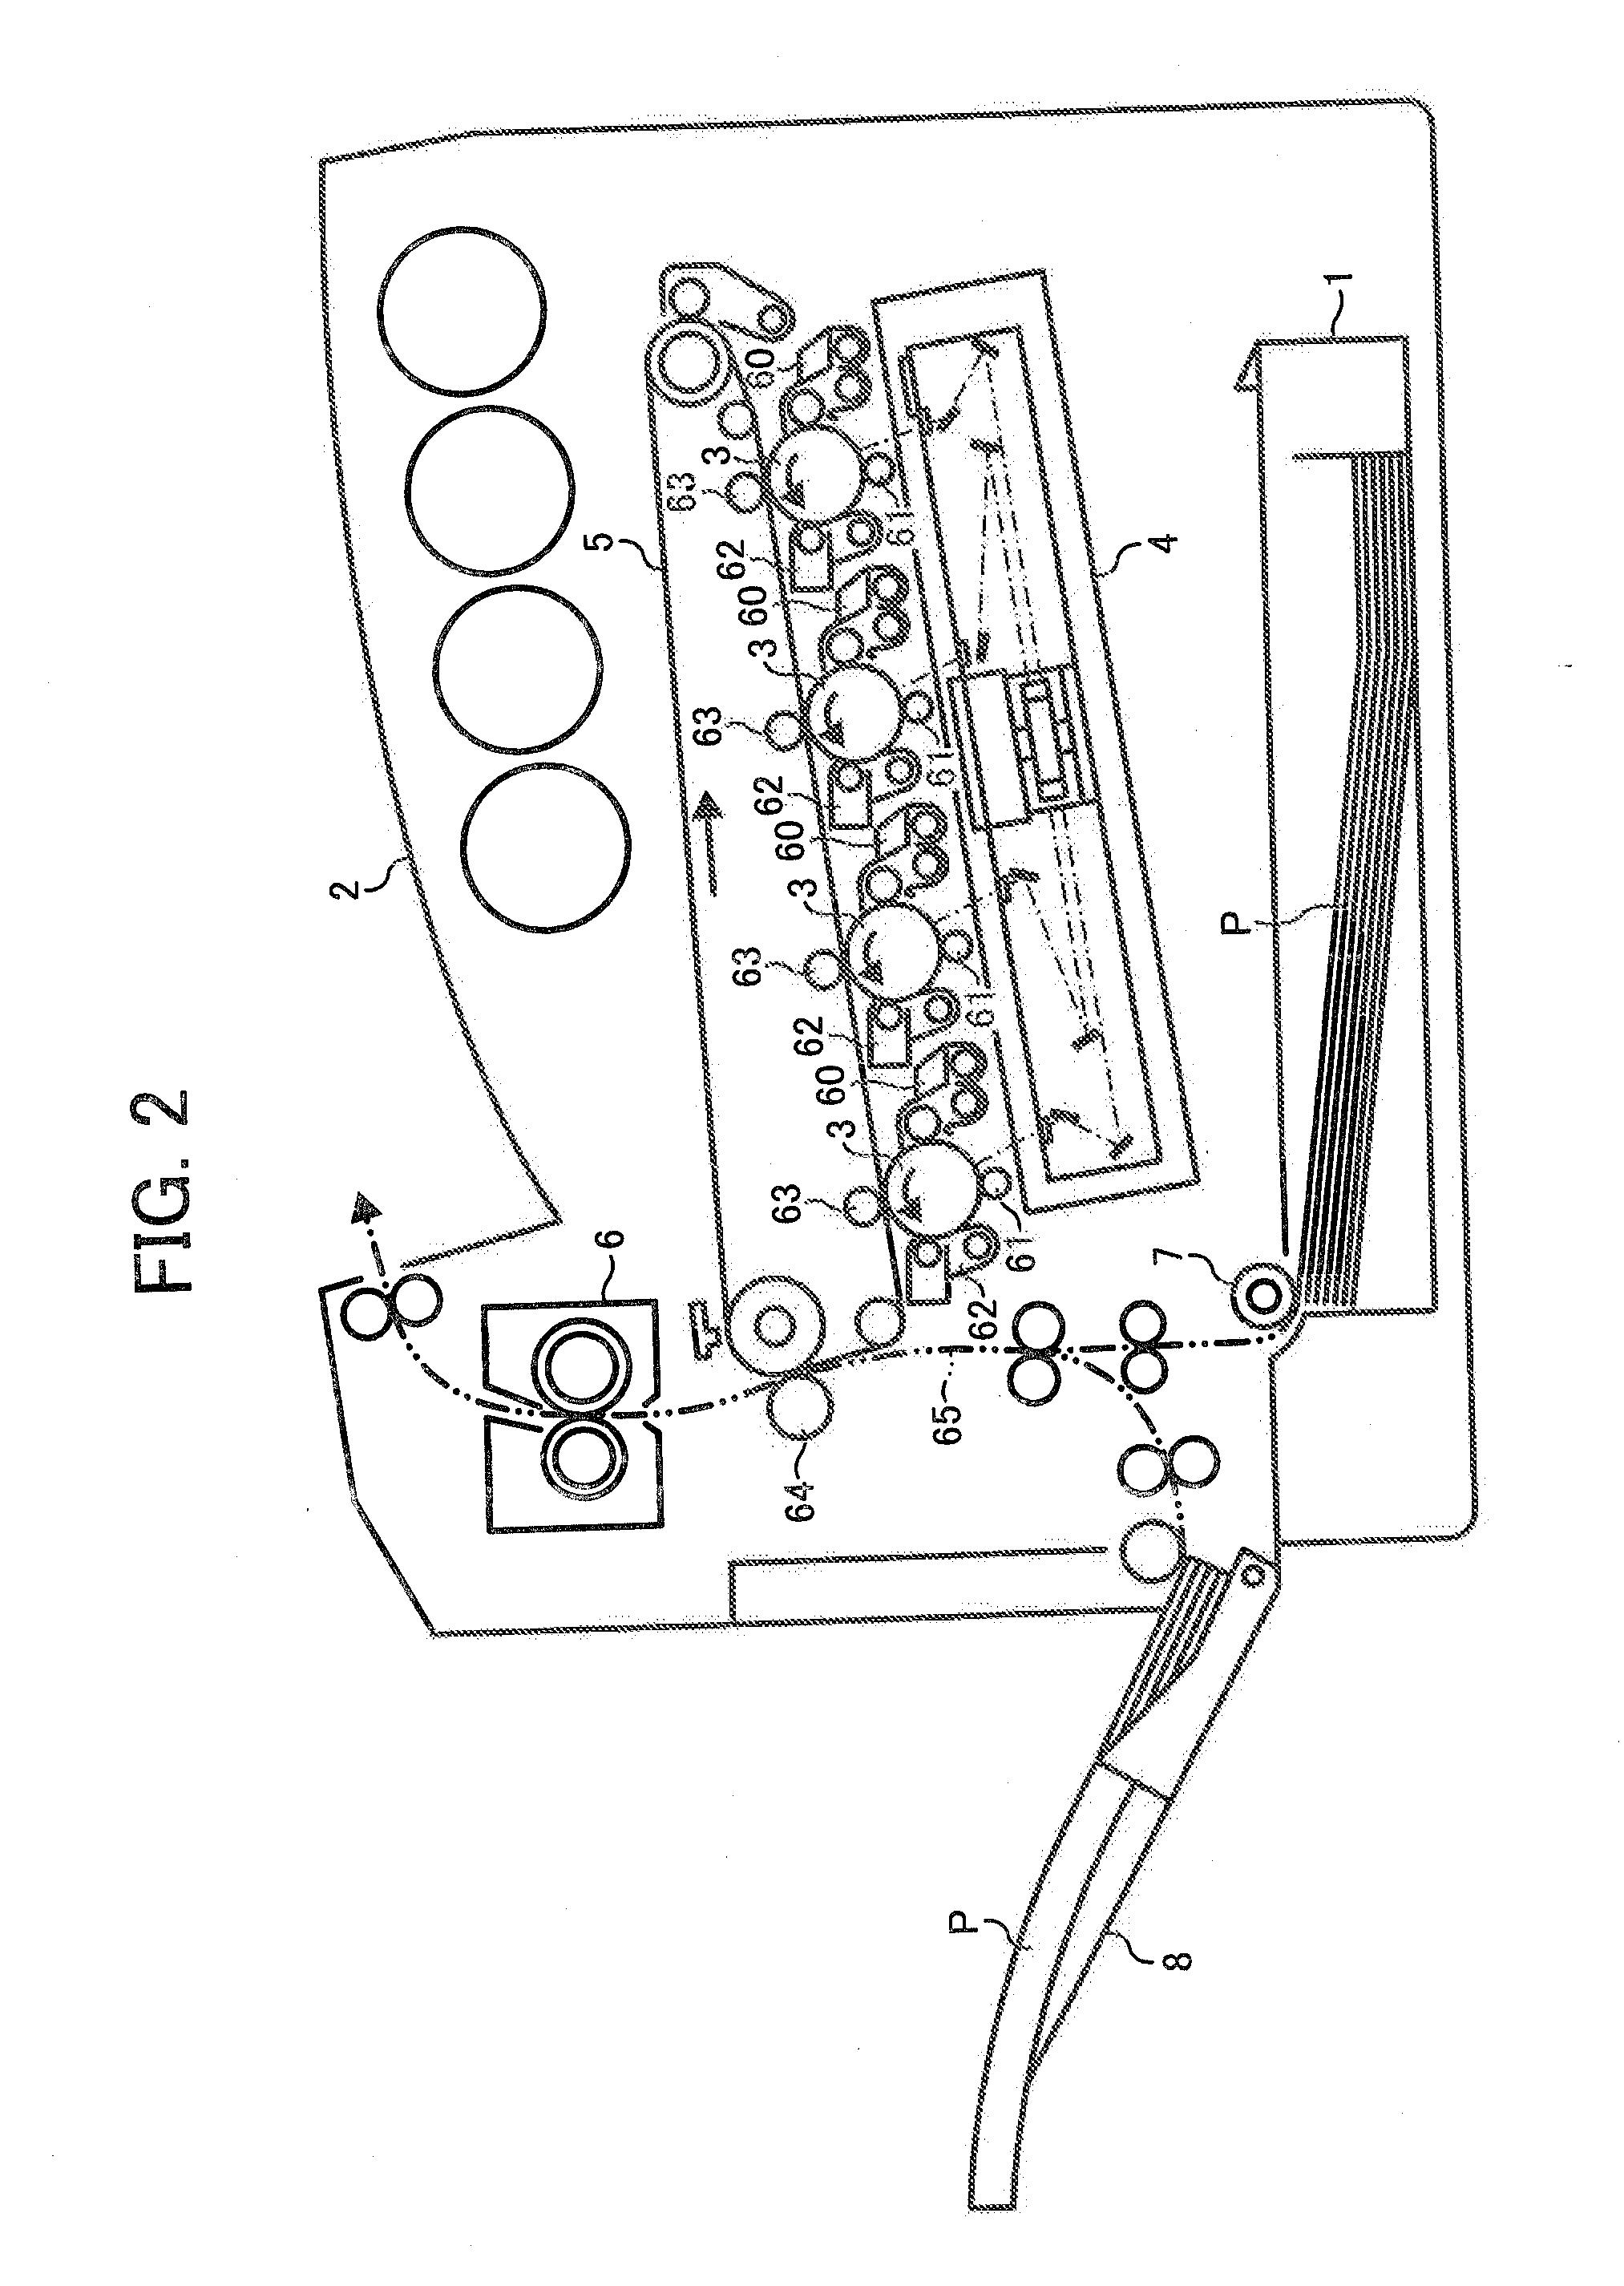 Sheet Feeding Cassette and Image Forming Apparatus